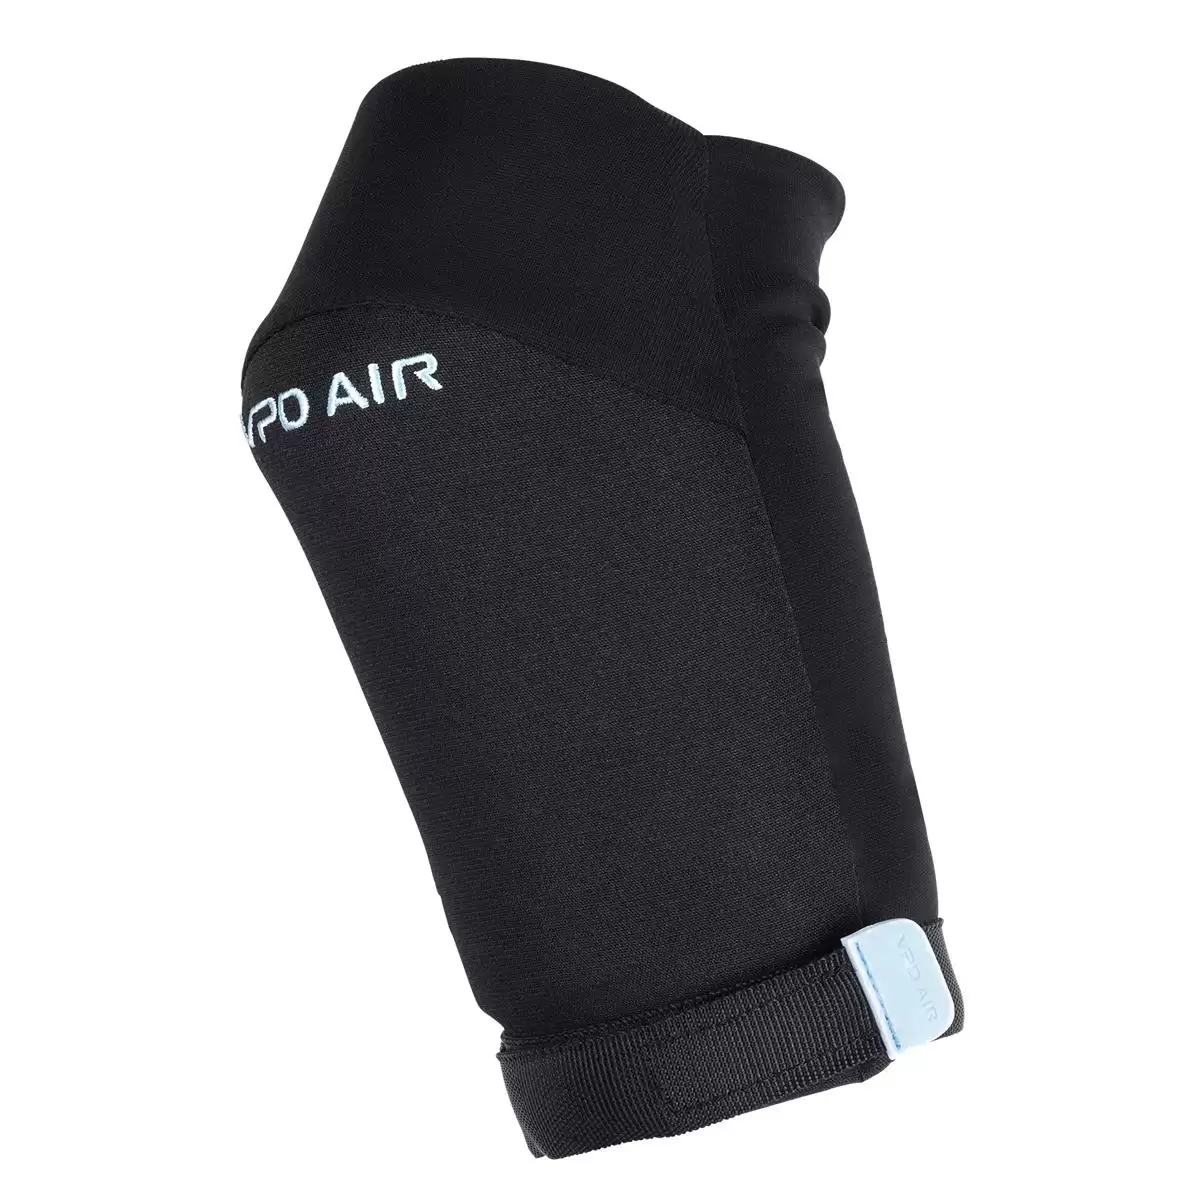 Joint VPD Air Elbow pads black size S #1